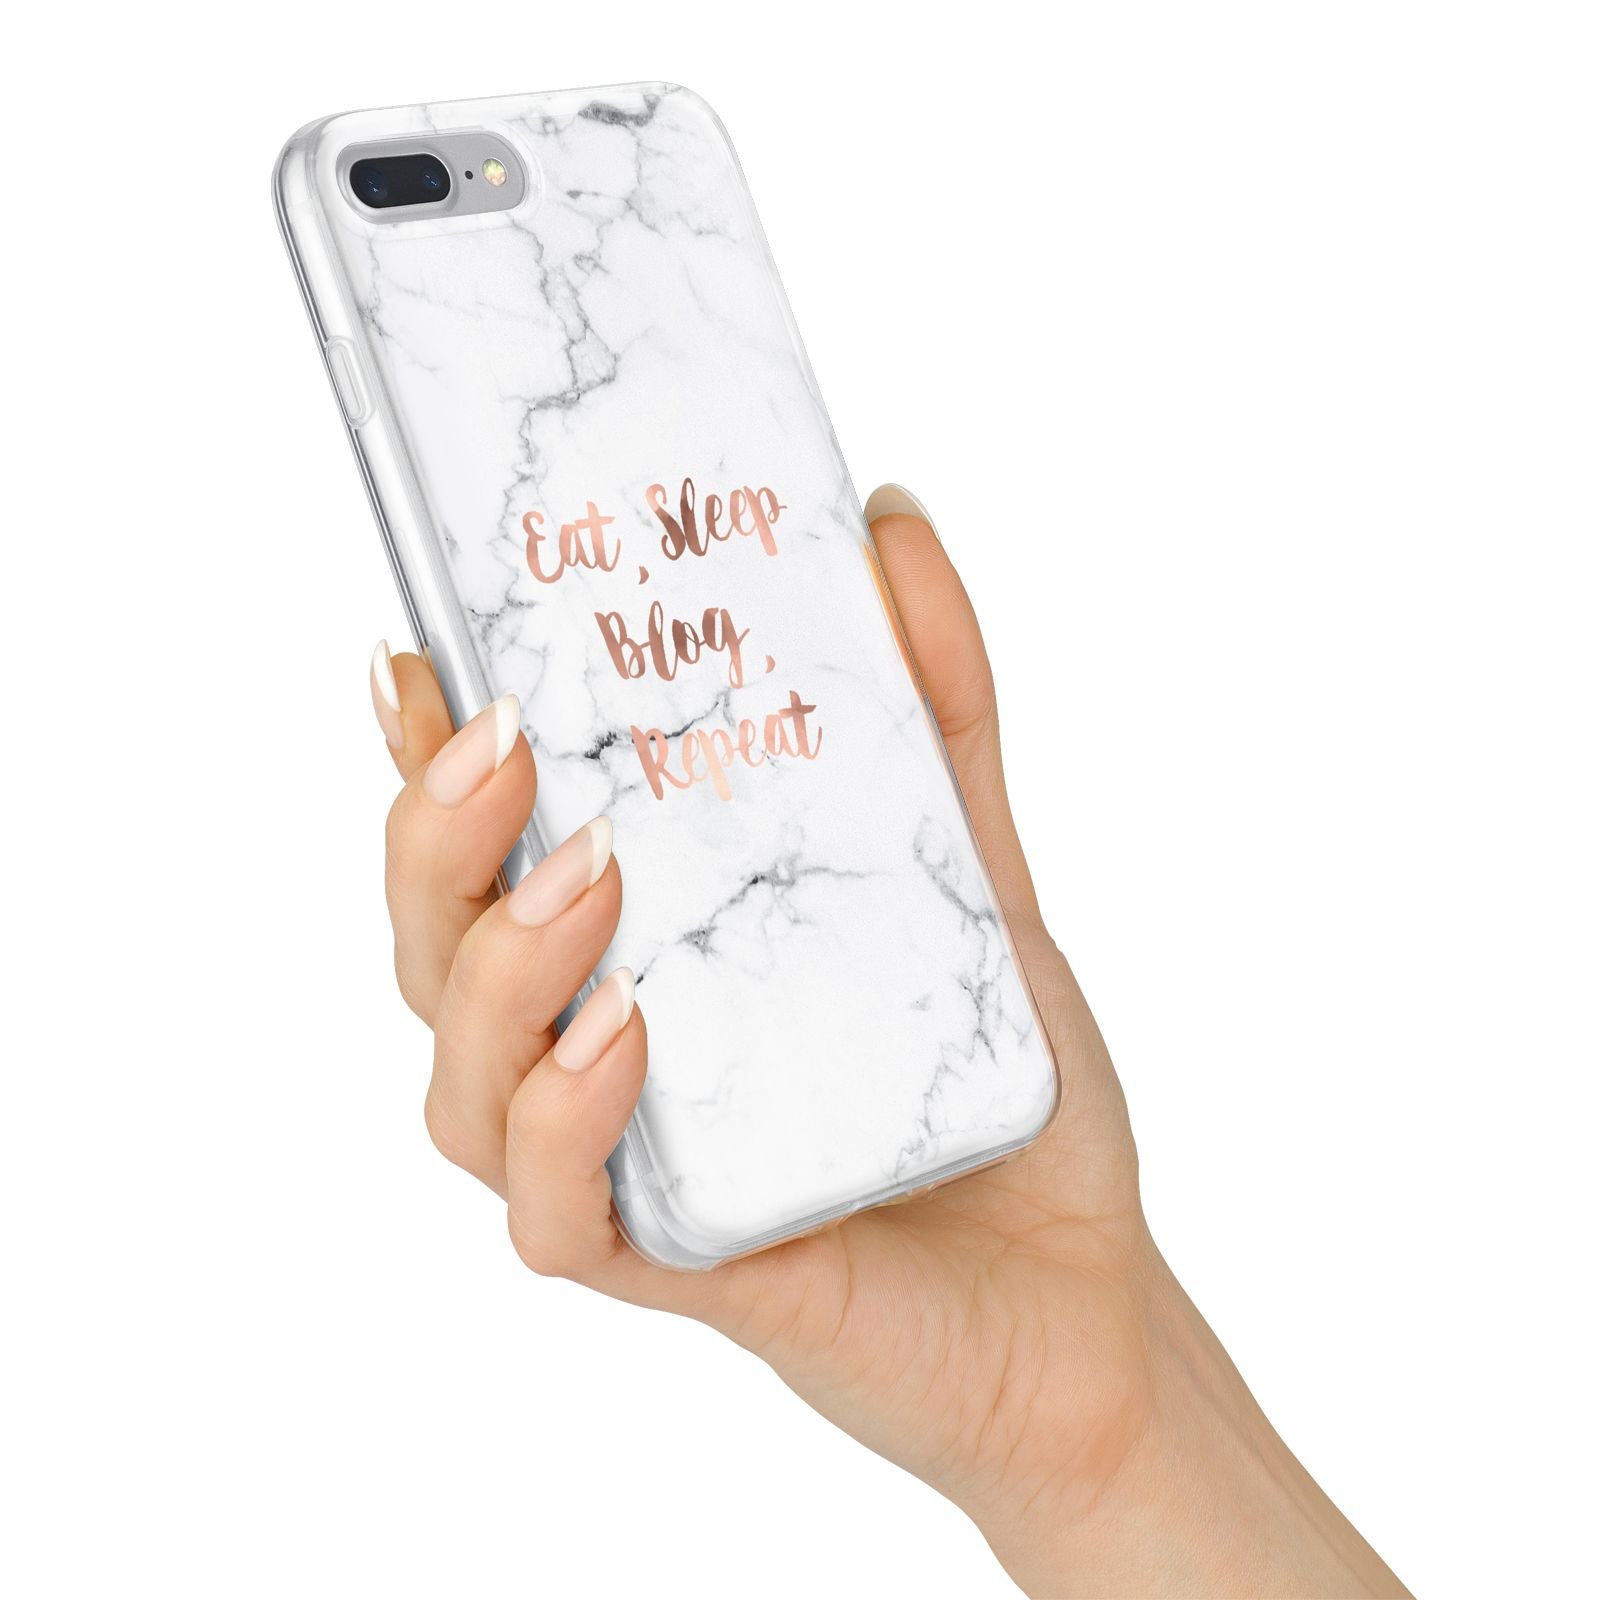 Eat Sleep Blog Repeat Marble Effect iPhone 7 Plus Bumper Case on Silver iPhone Alternative Image